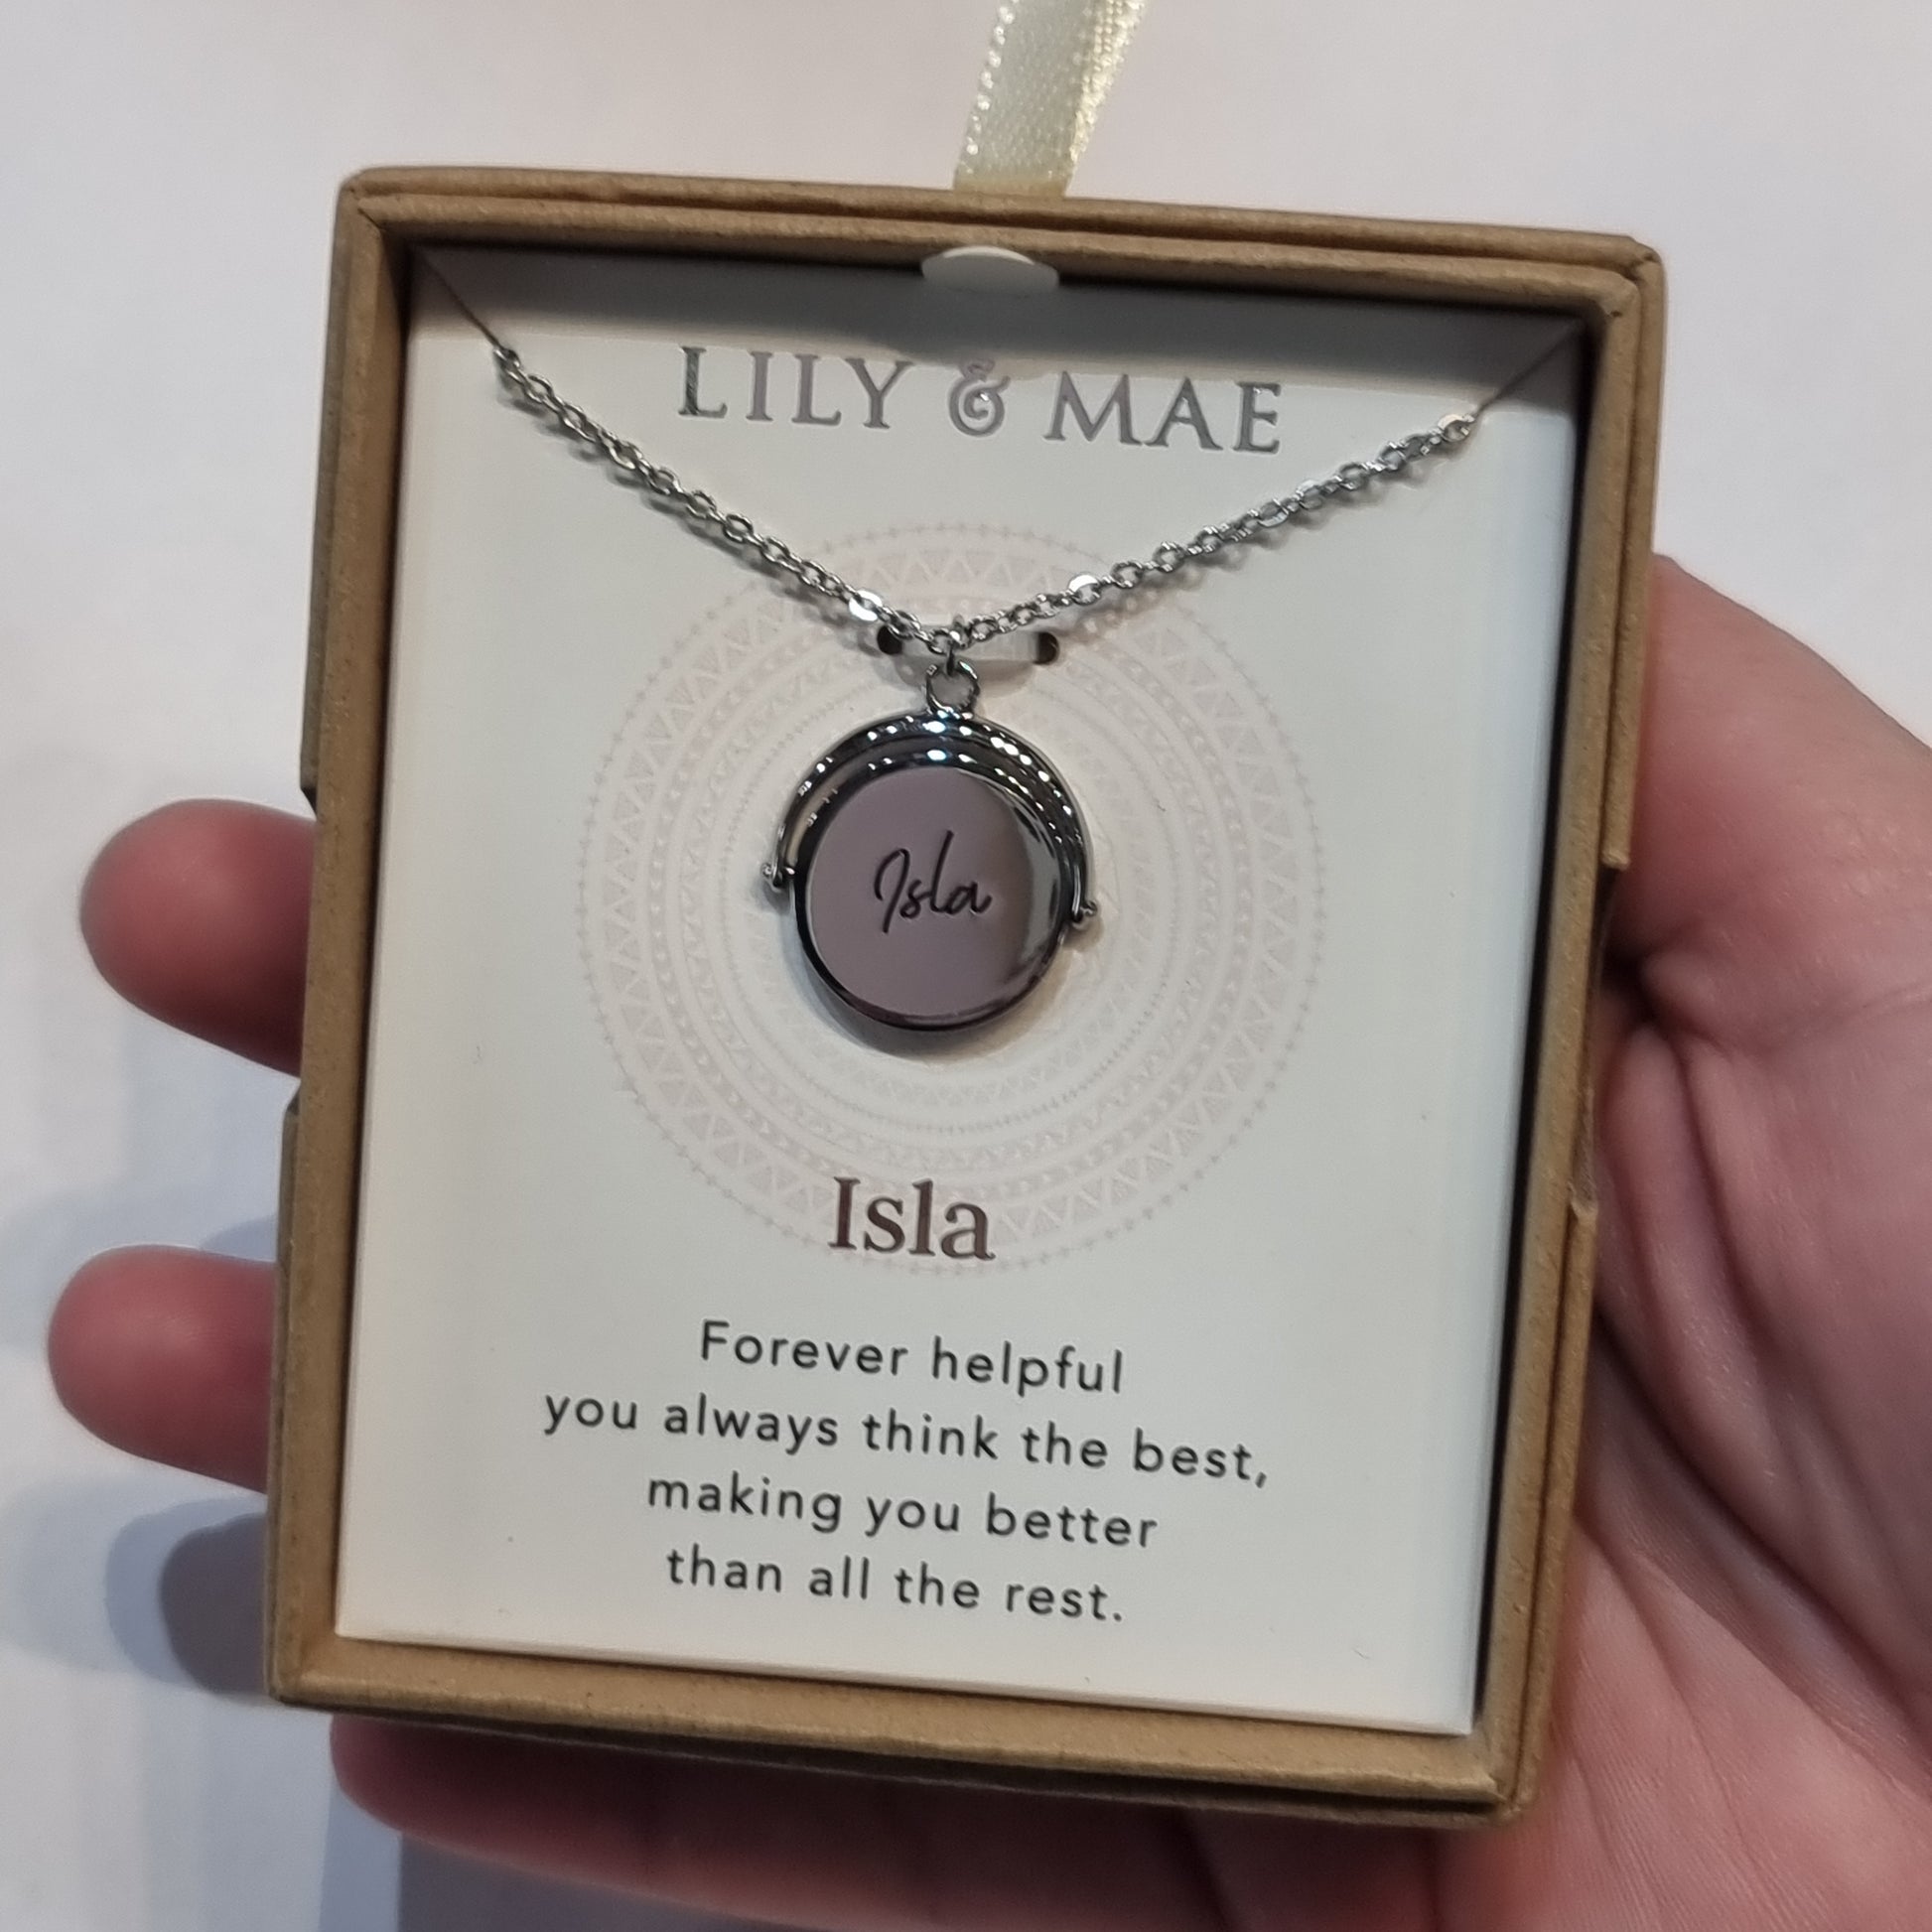 L&M spinning necklace - Isla - Rivendell Shop